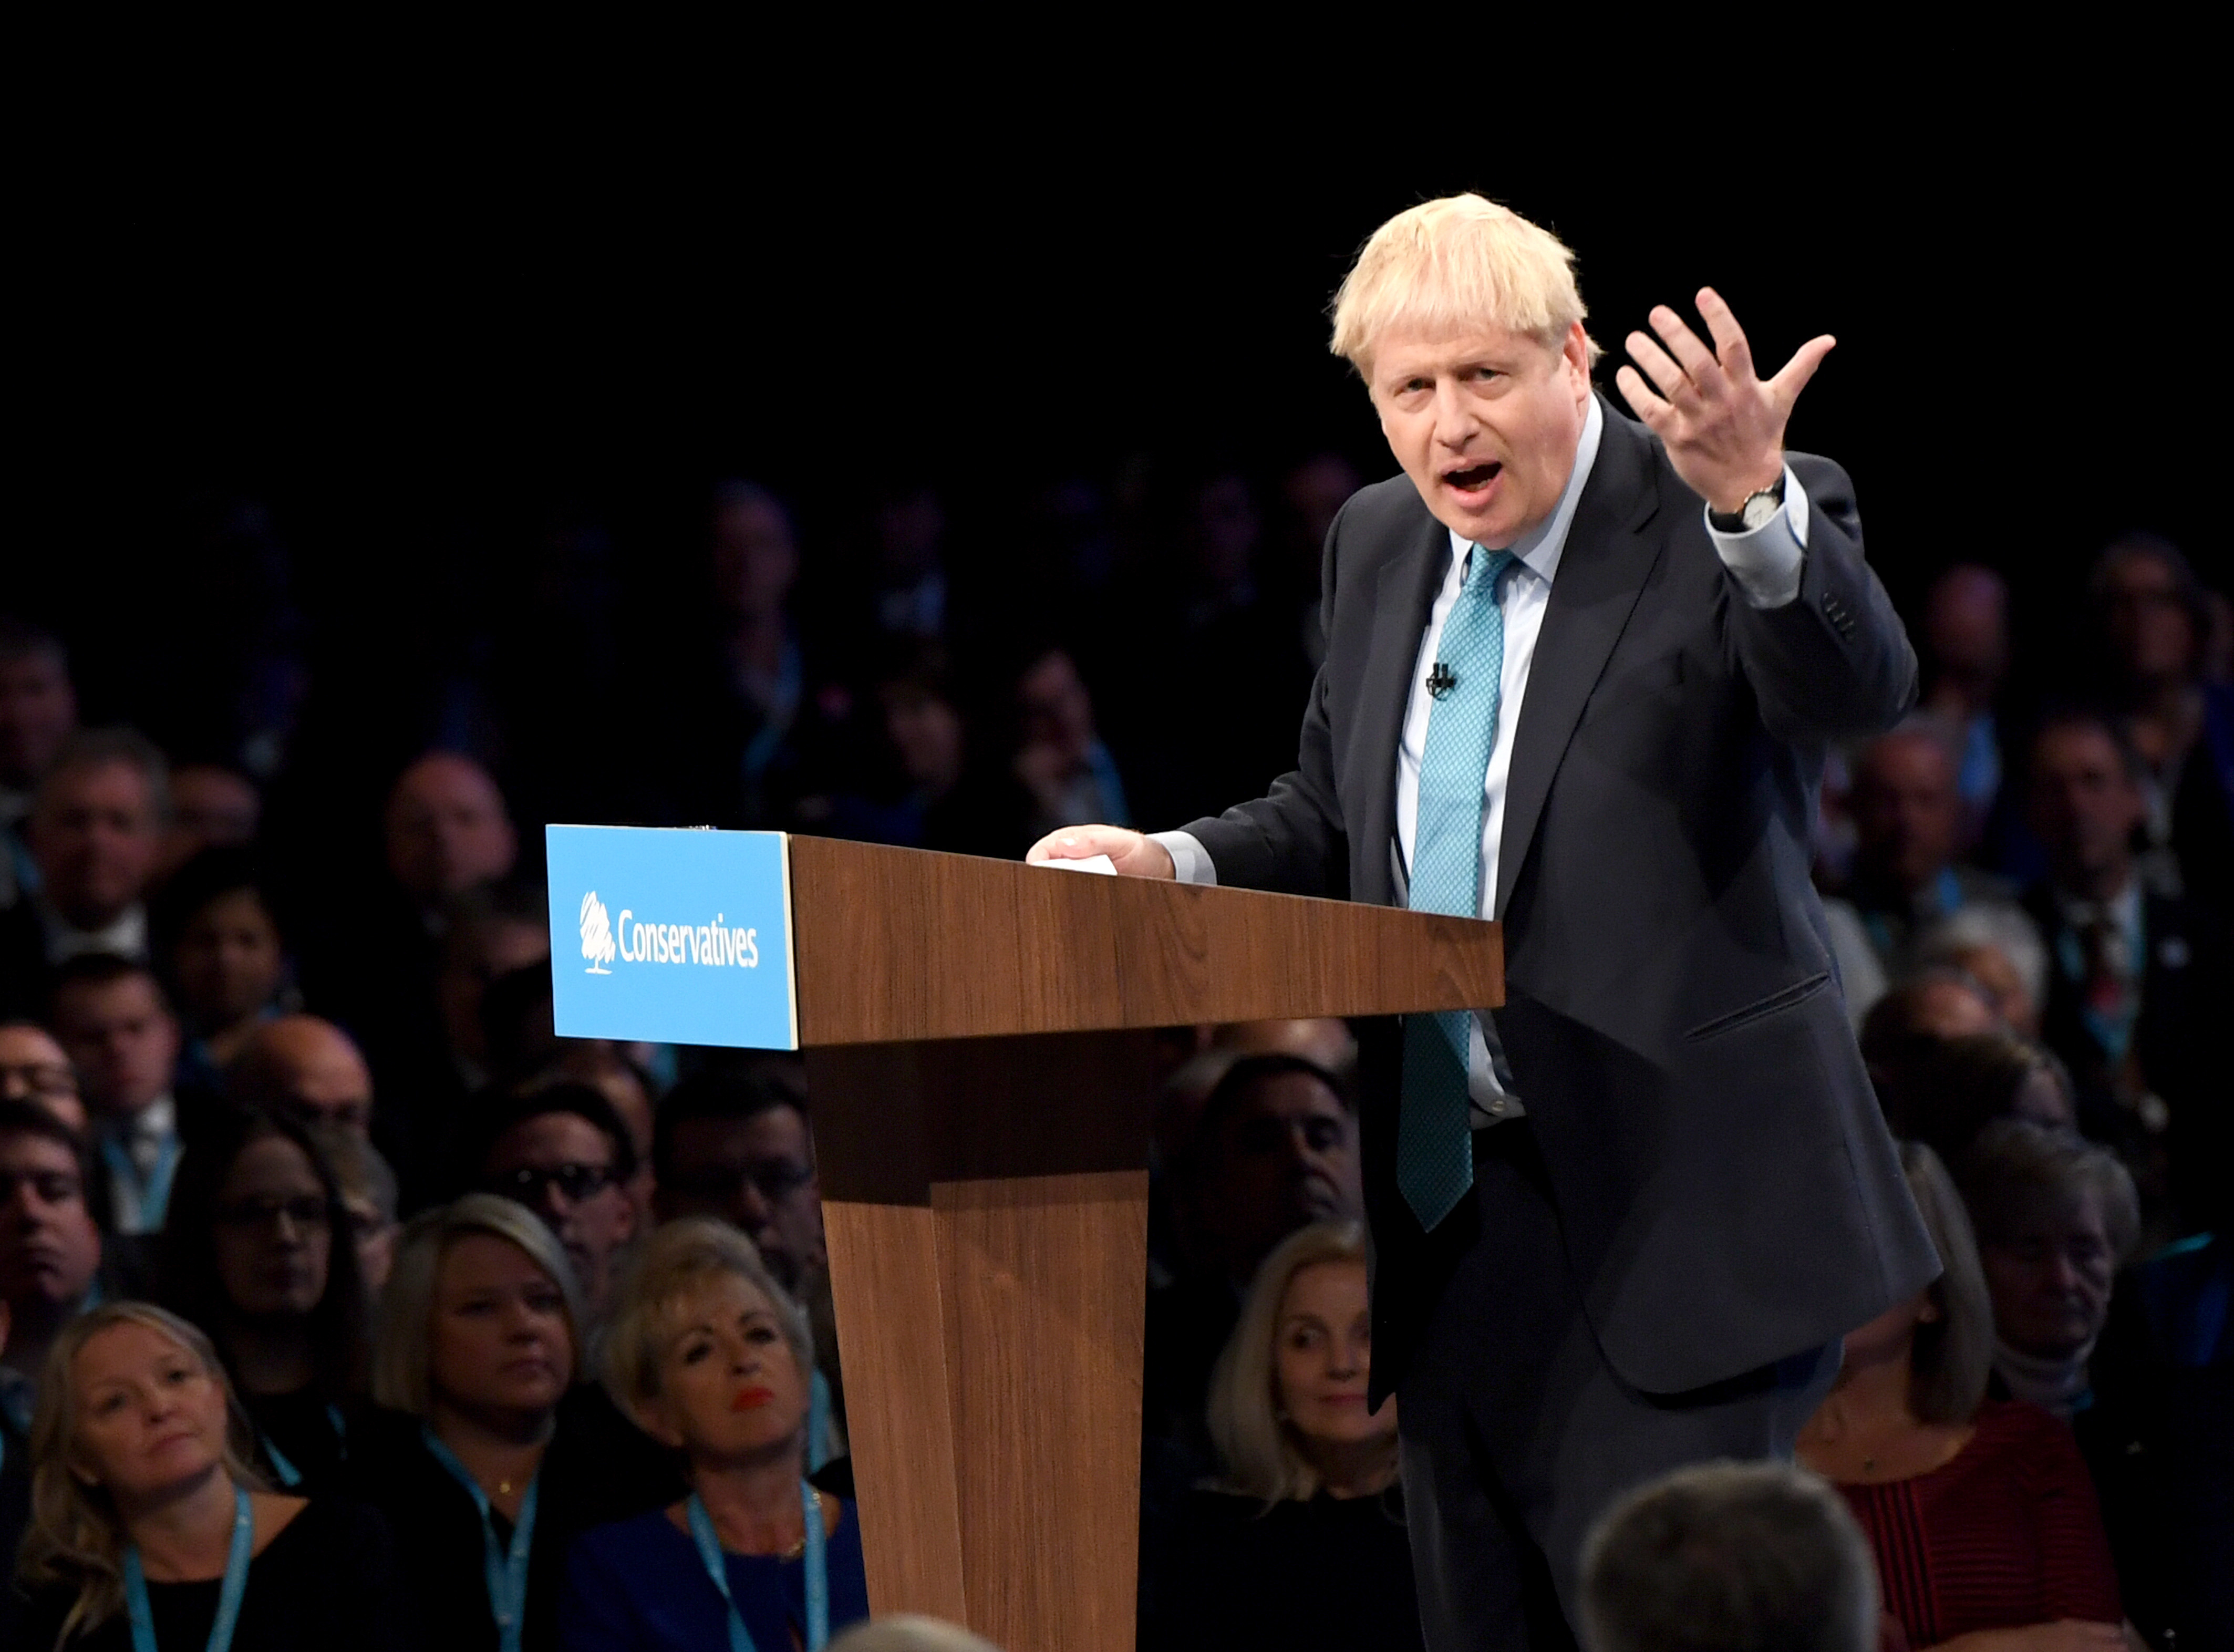 Prime Minister Boris Johnson delivers his speech during the Conservative Party Conference at the Manchester Convention Centre. (Photo by Stefan Rousseau/PA Images via Getty Images)